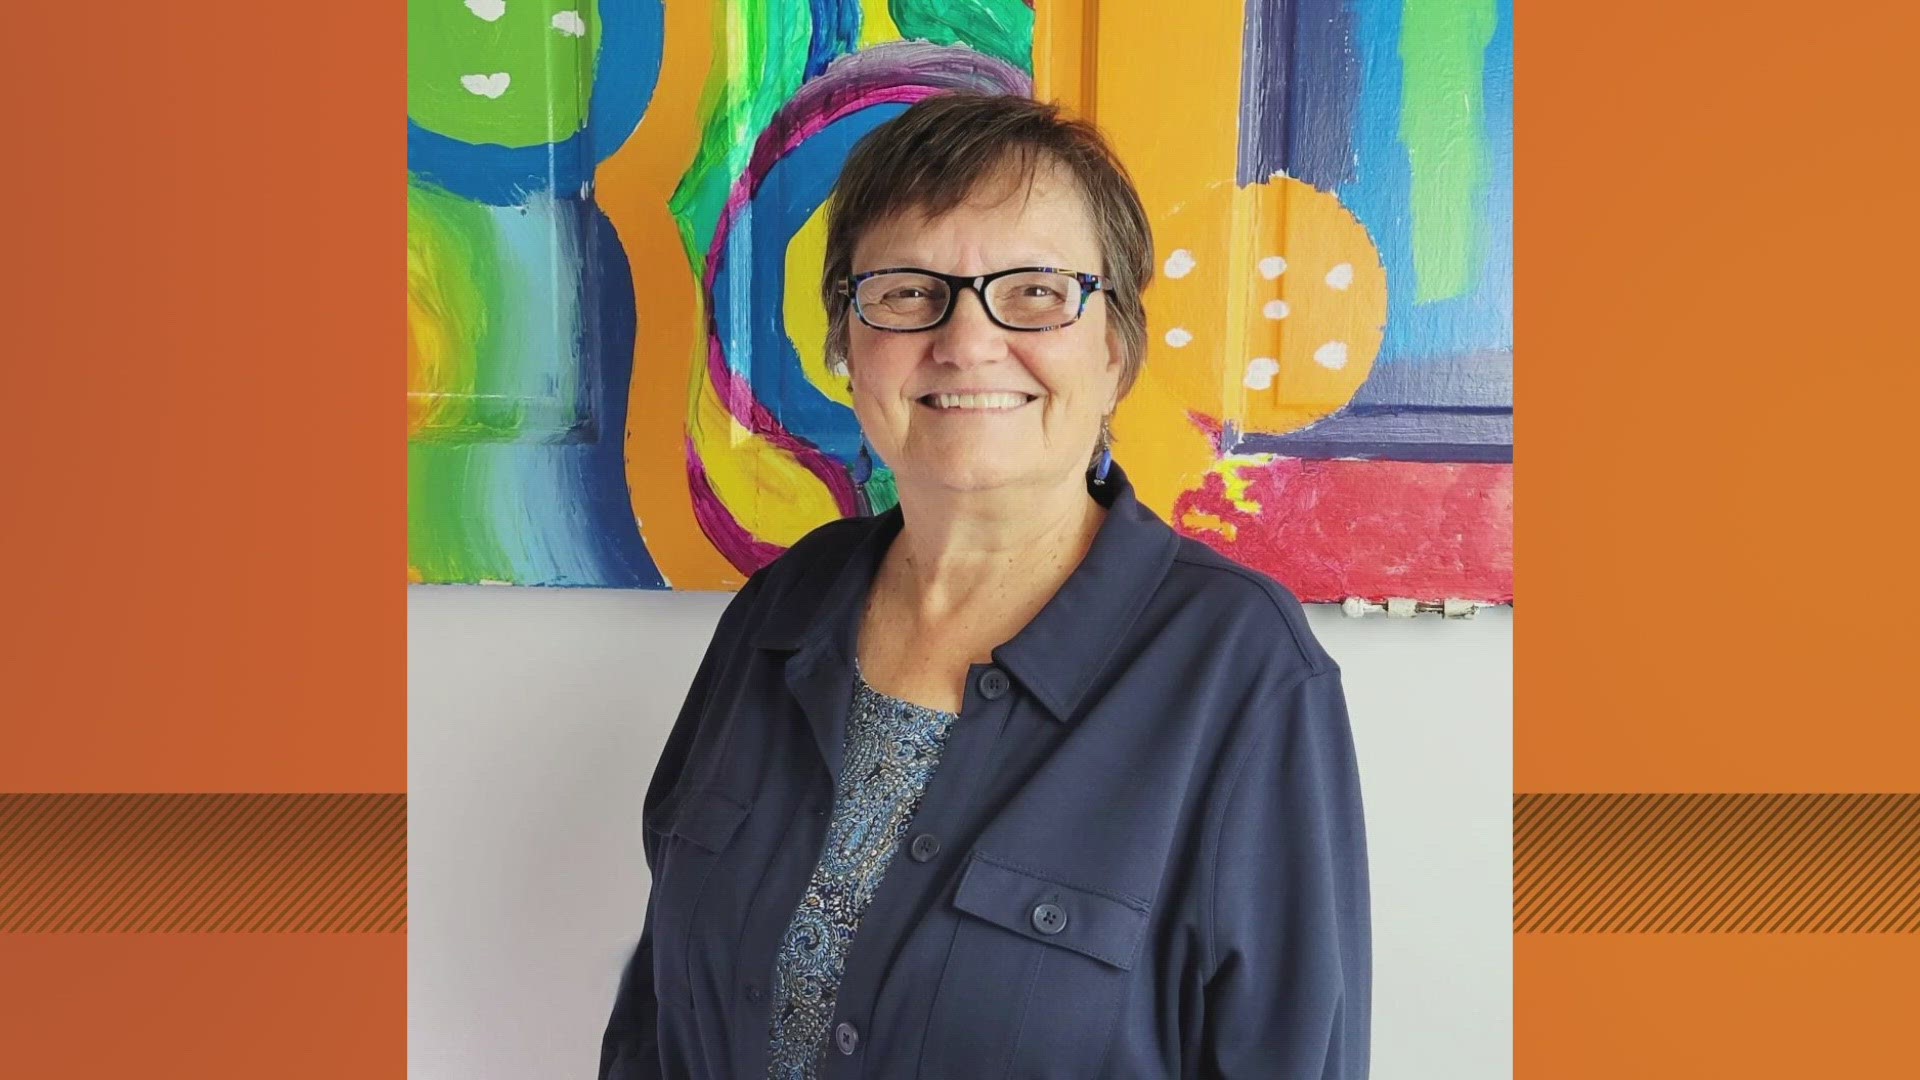 Cindy Watson has been working with JASMYN for nearly three decades, focusing on LGBTQ+ issues in the Jacksonville community.